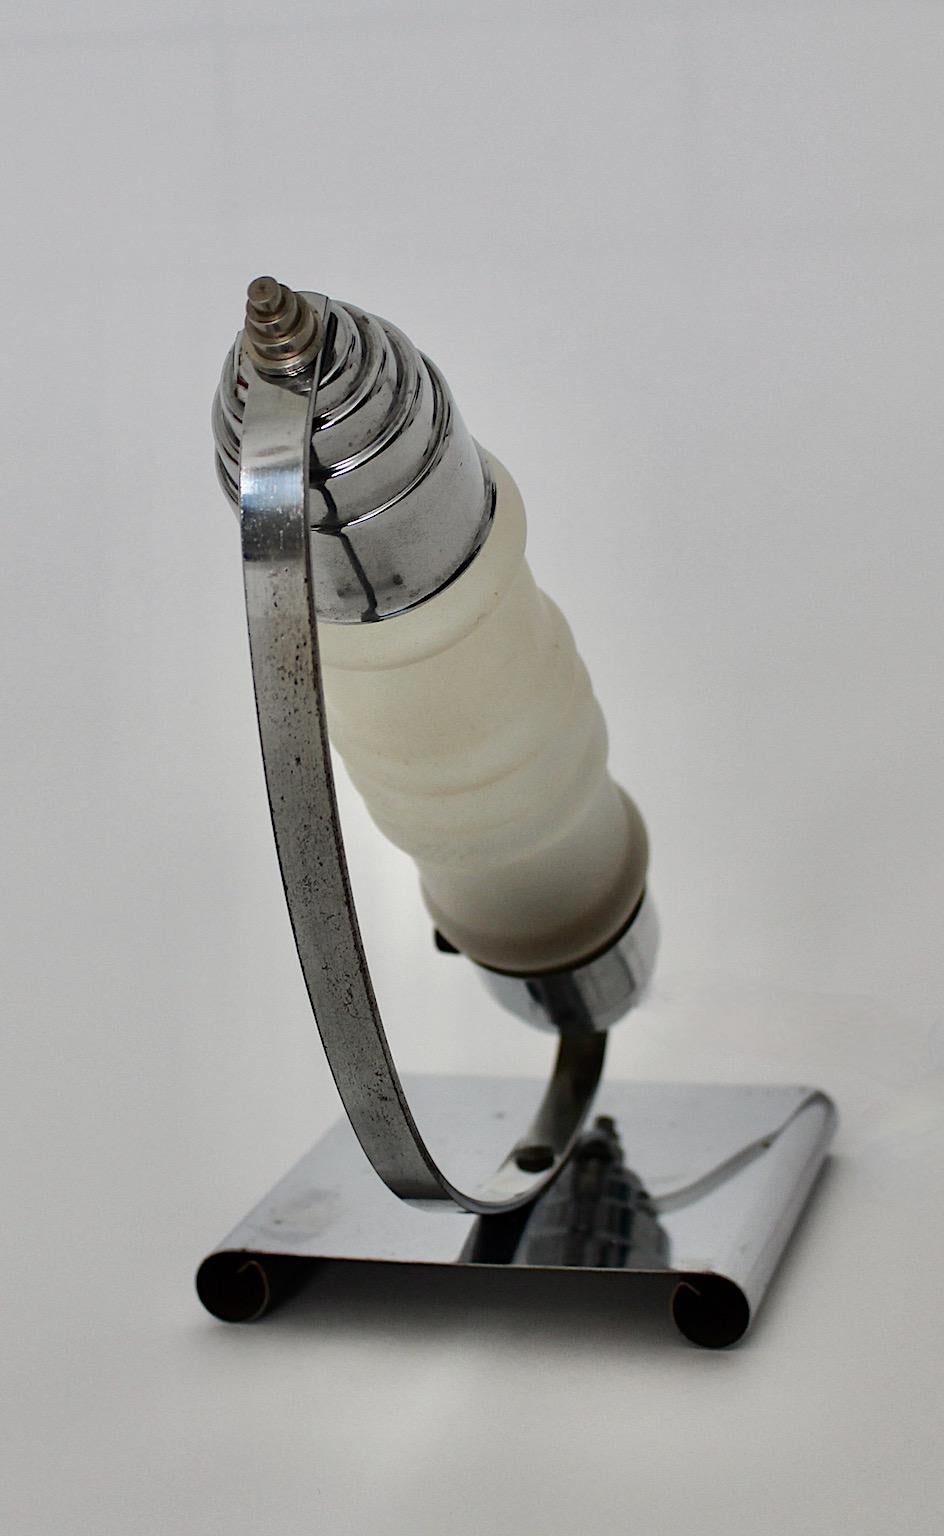 Streamline Moderne vintage table lamp from chromed metal and wavy milk glass designed and manufactured 1930s Czech Republic.
The table lamp shows no damage and is in original condition. The main cable was changed few years ago.
Sleekness and